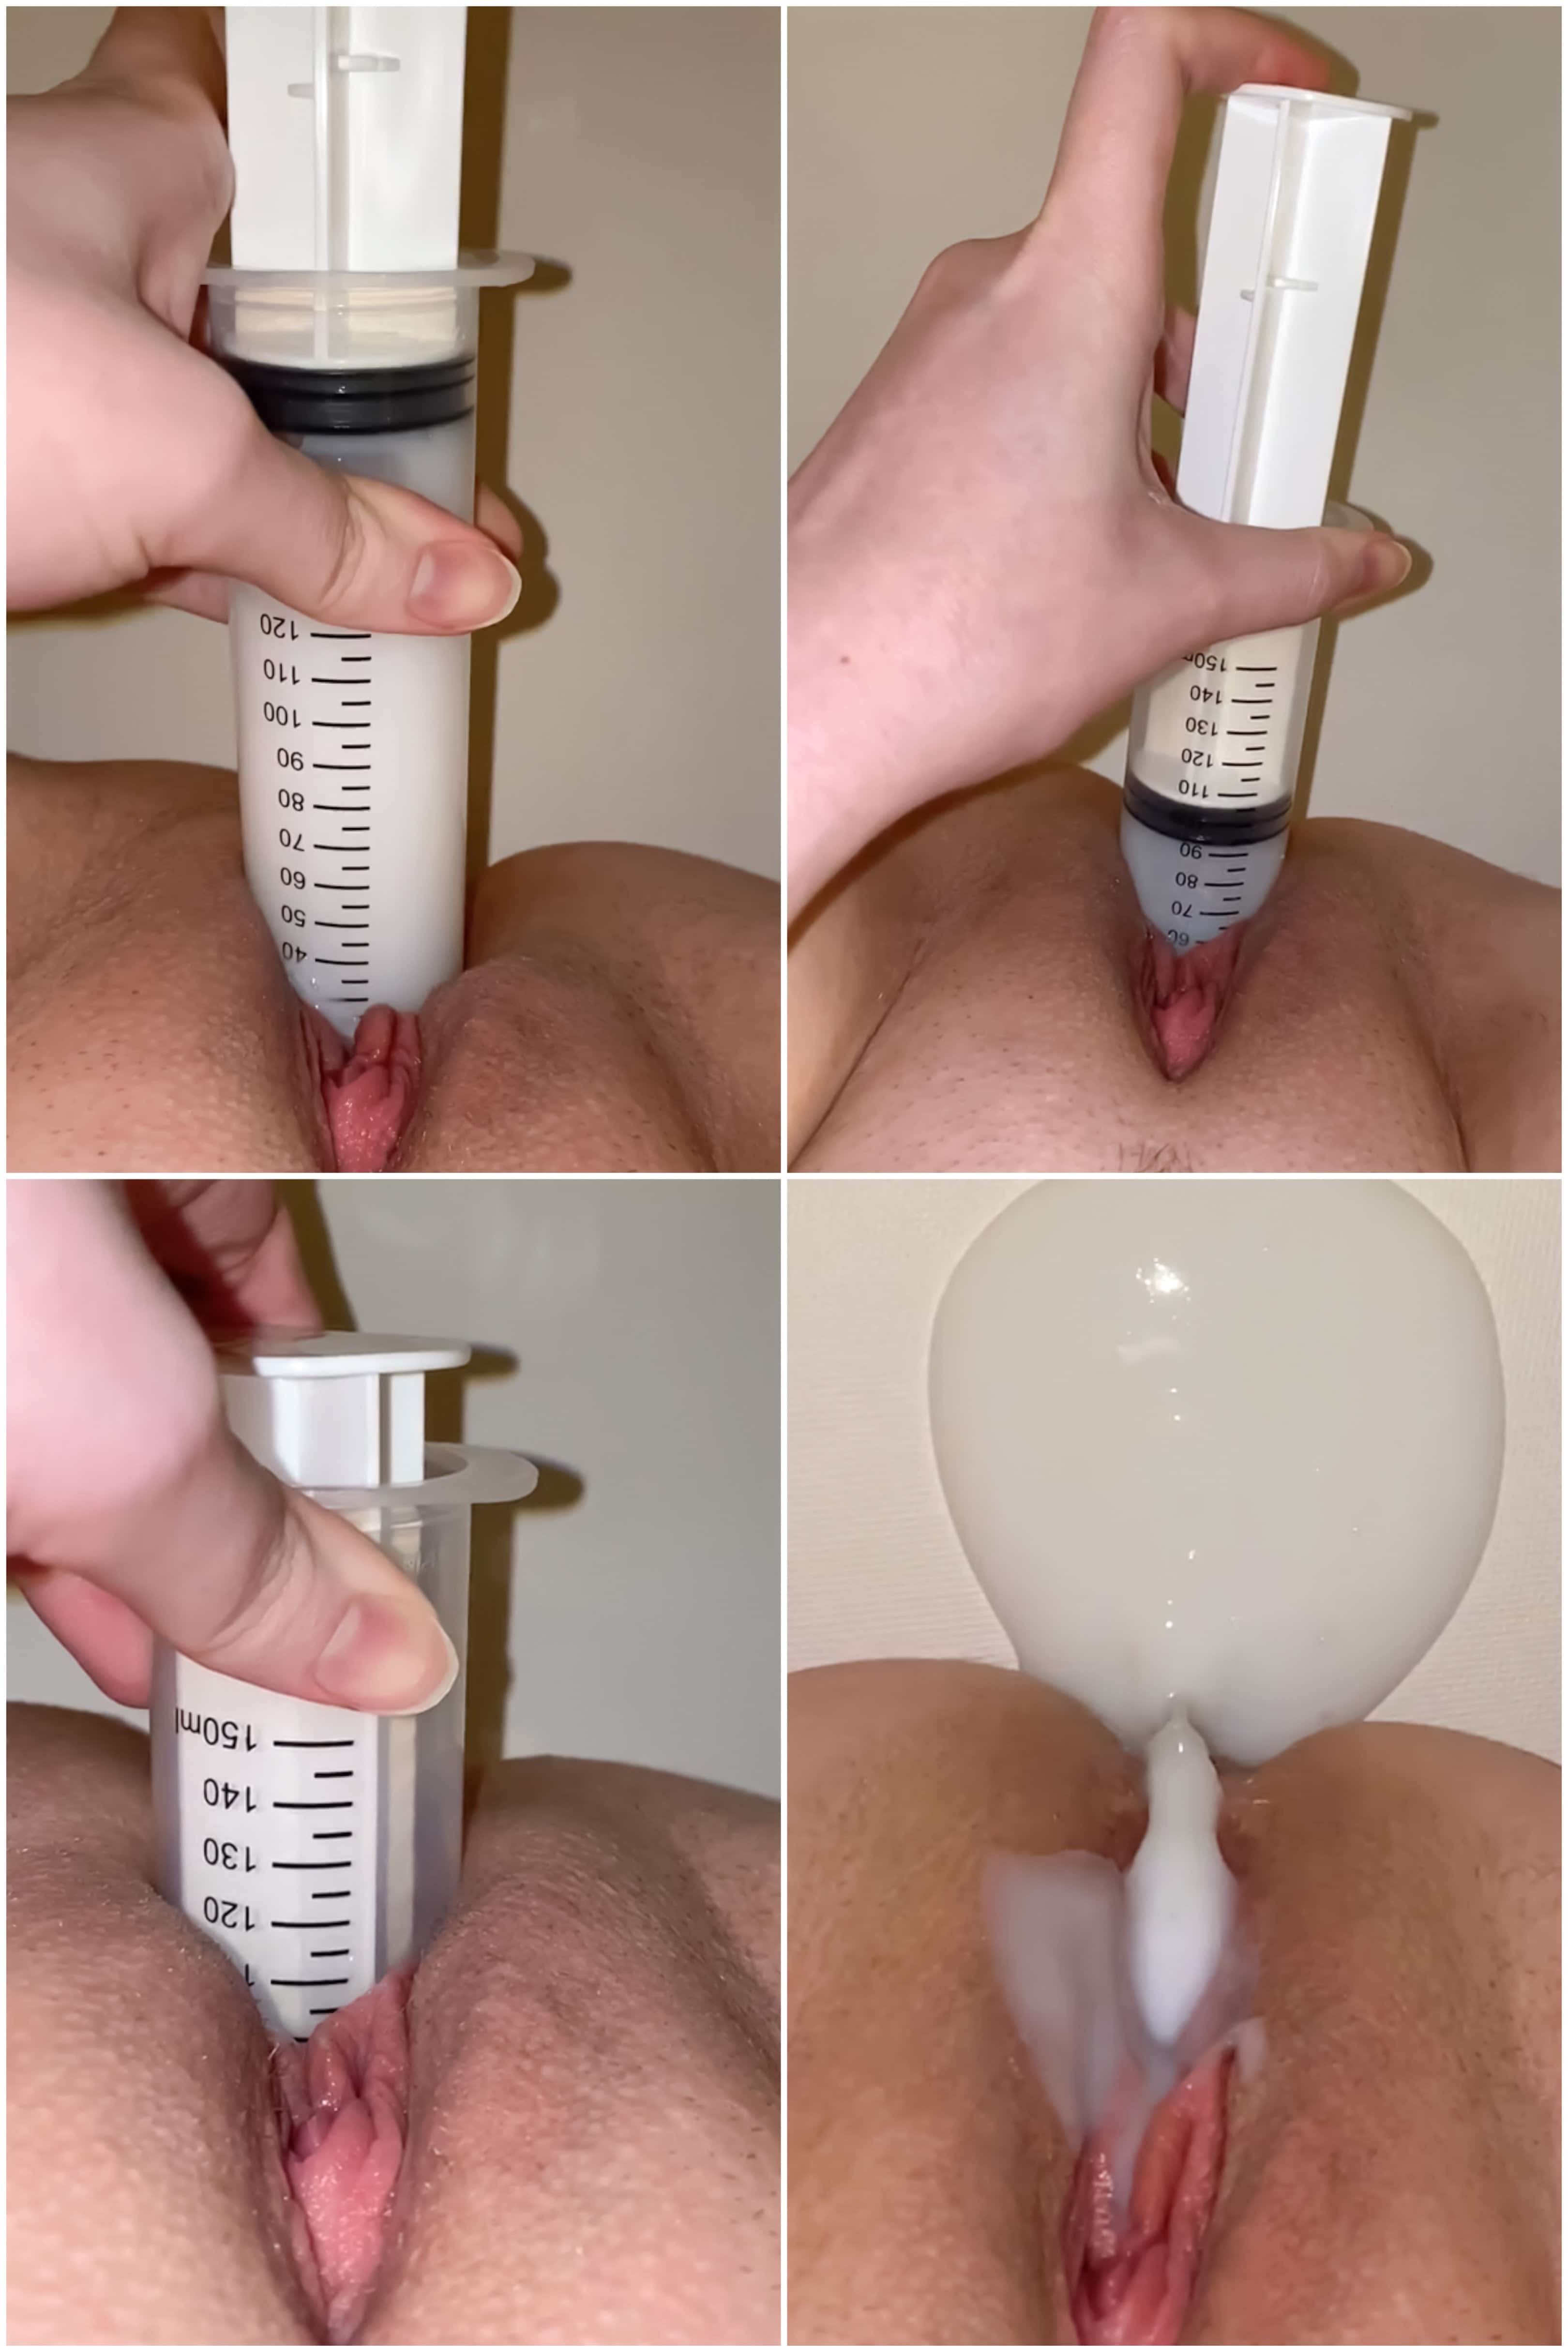 Artificial insemination with sperm as lubricant Sperm ice cubes